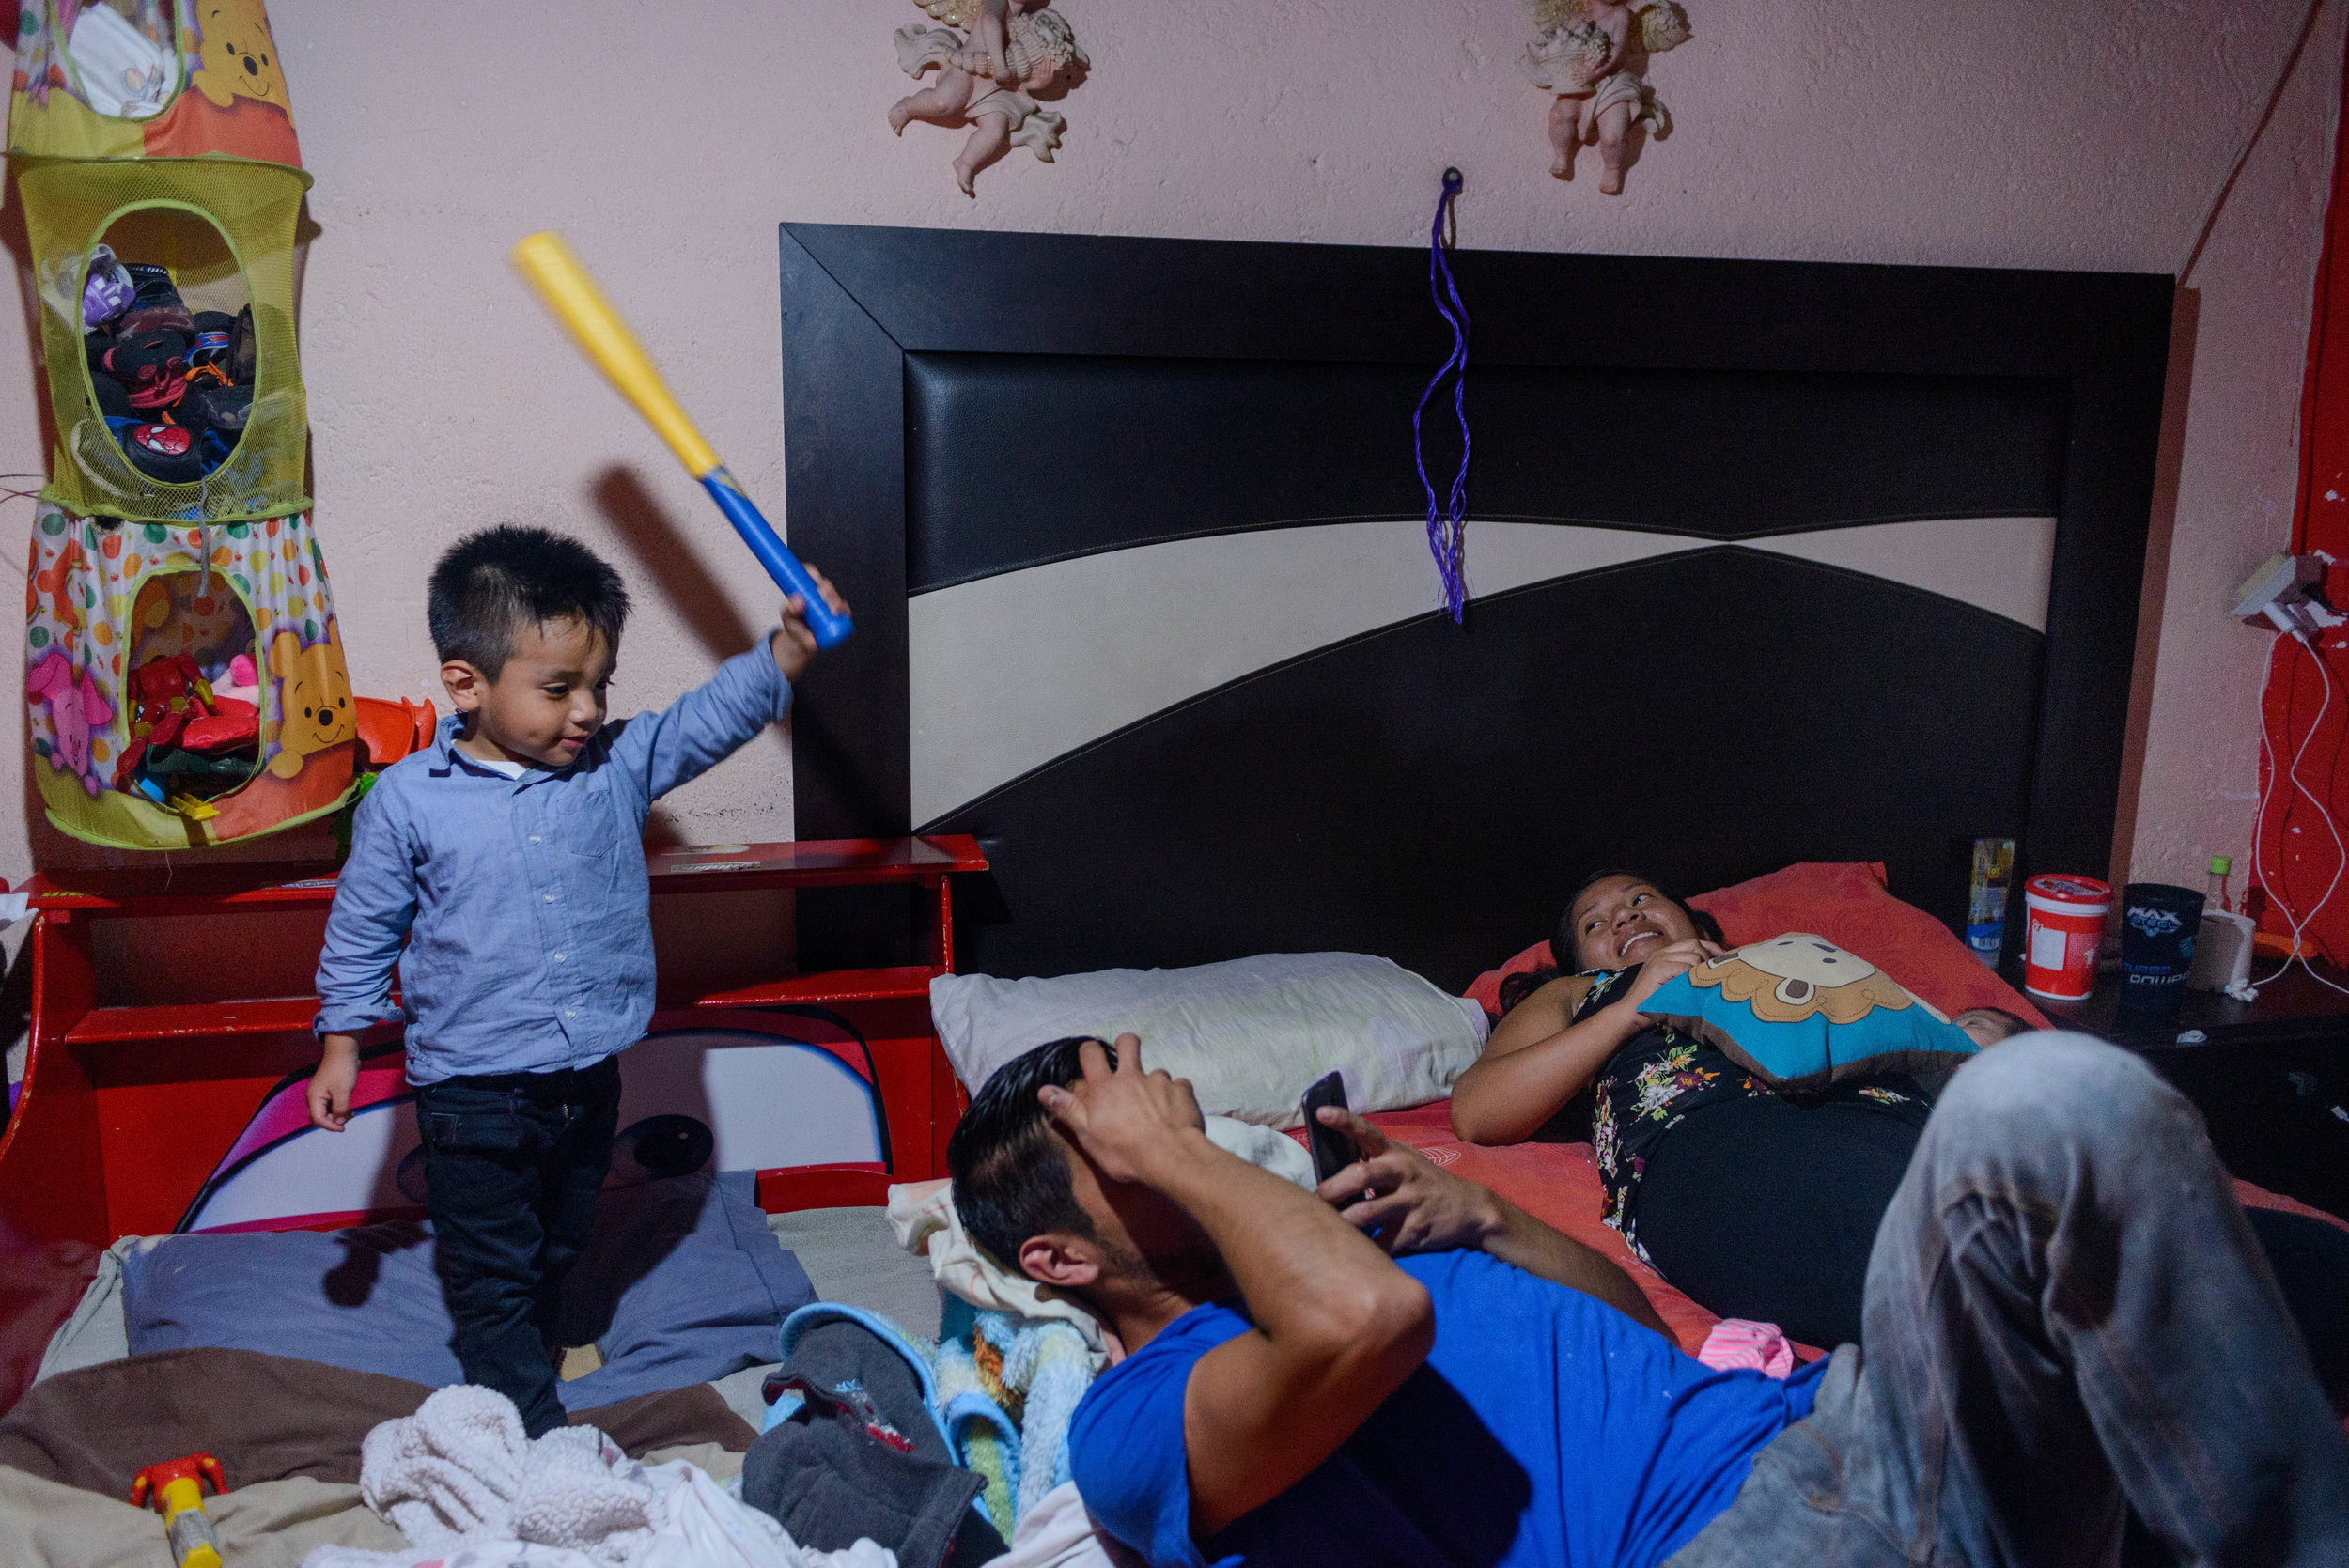  3 year old Logan threatens to hit his father with a play bat while his mother Marlen enjoys a moment of rest with her 2-month old daugher. 